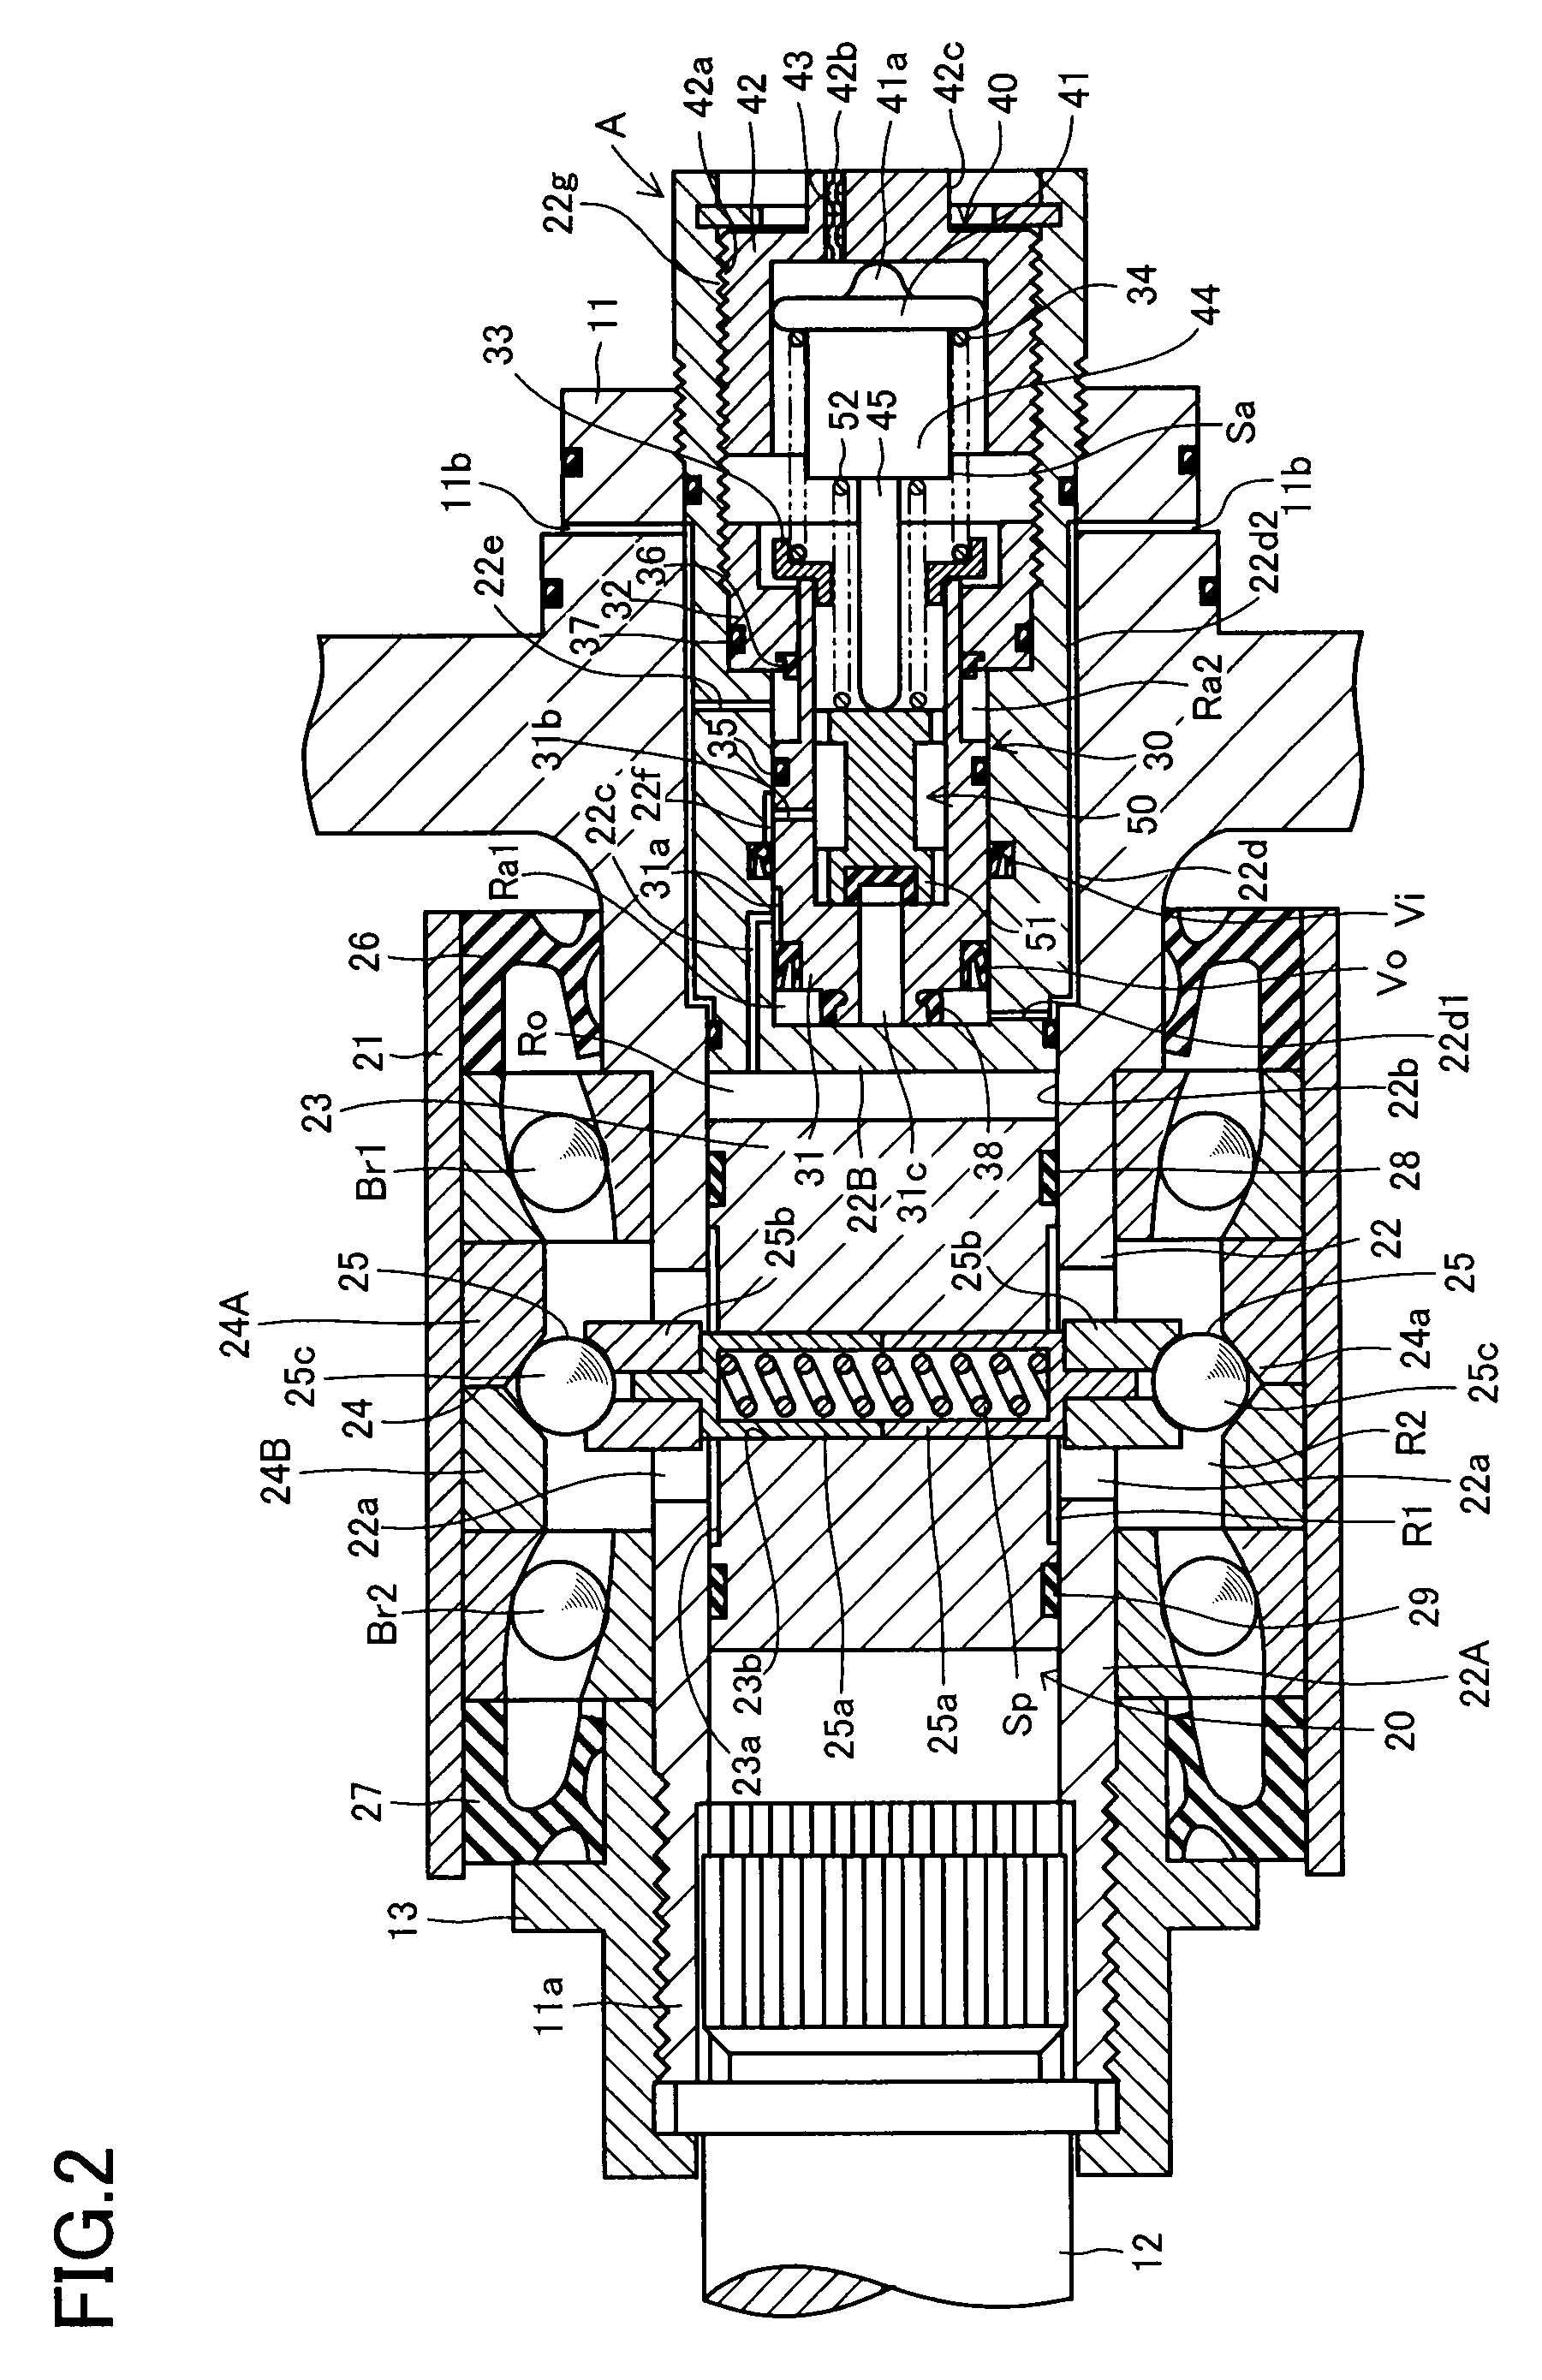 Device for generating tire air pressure